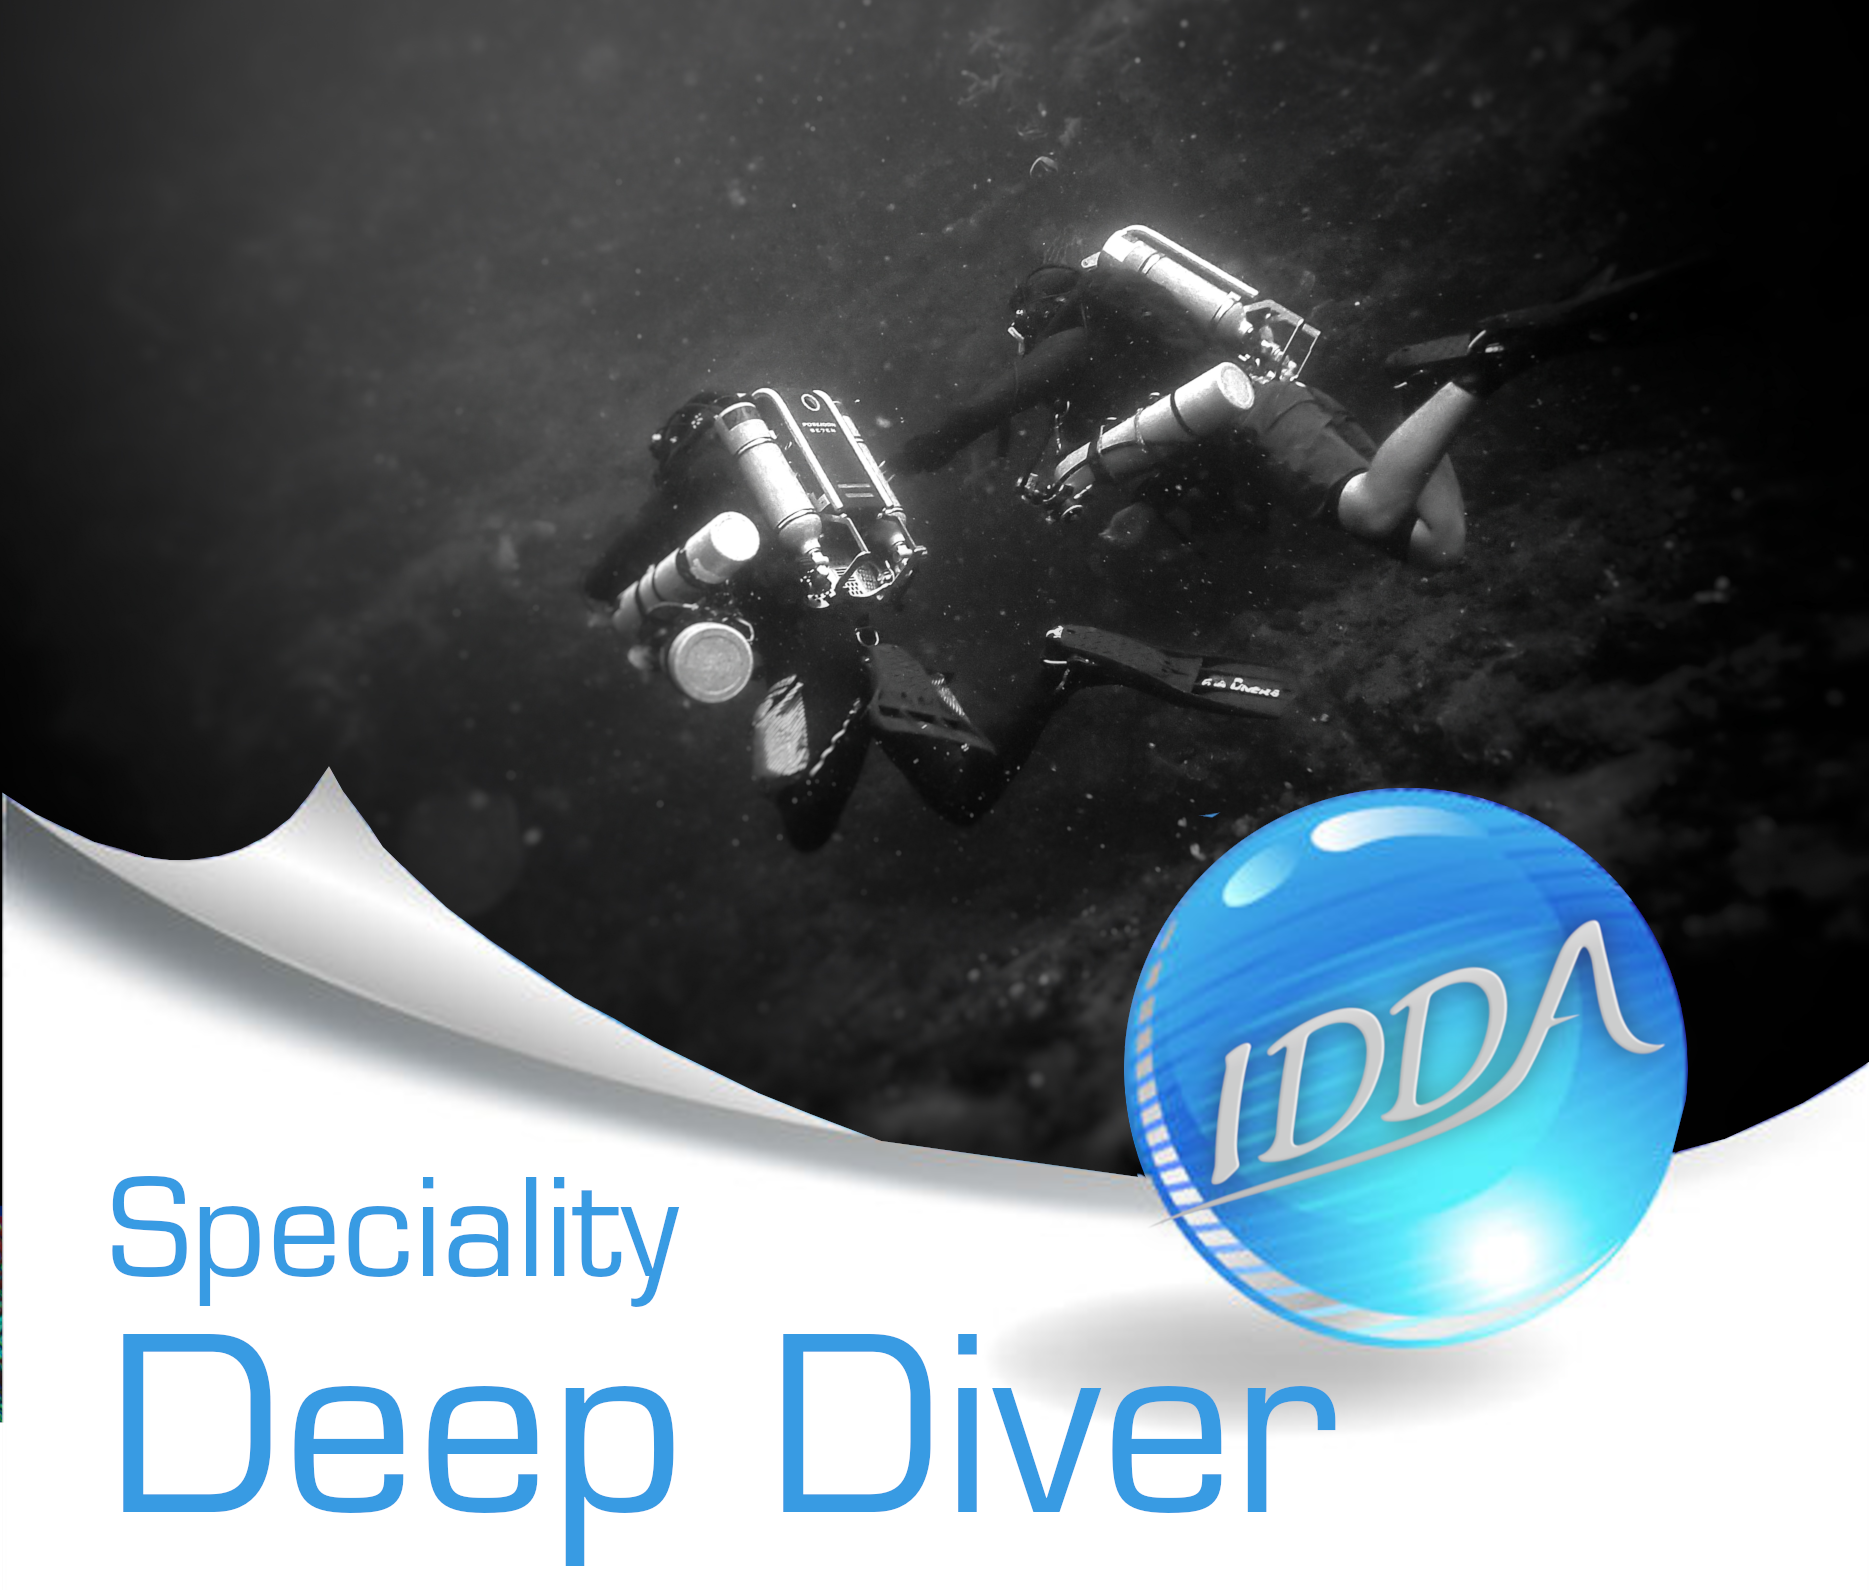 Speciality Deep Diver